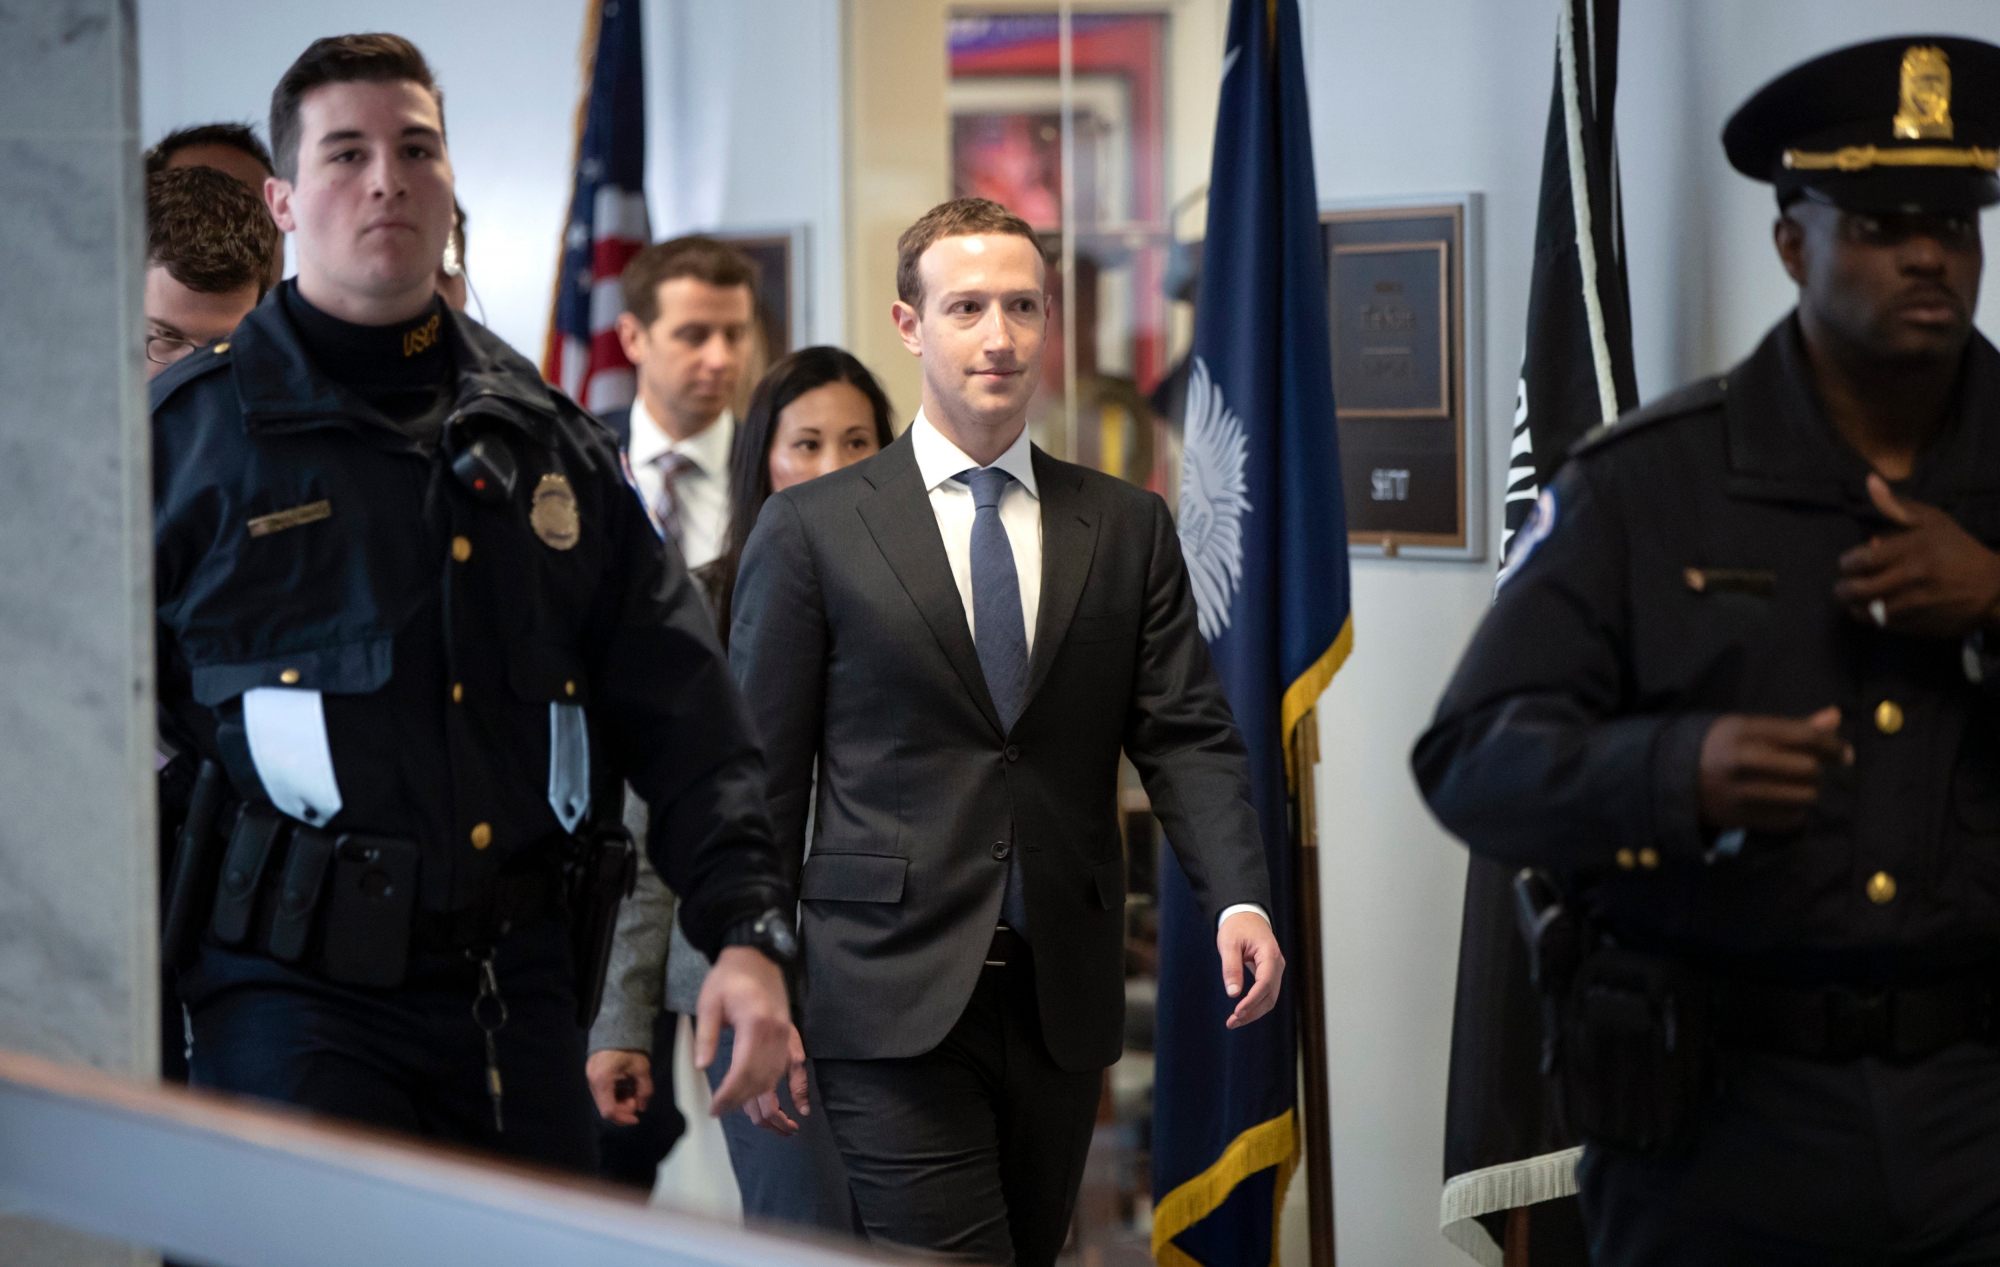 Facebook CEO Mark Zuckerberg leaves a meeting with Sen. Bill Nelson, D-Fla., the ranking member of the Senate Commerce Committee, on Capitol Hill in Washington, Monday, April 9, 2018. Zuckerberg will testify Tuesday before a joint hearing of the Commerce and Judiciary Committees about the use of Facebook data to target American voters in the 2016 election. (AP Photo/J. Scott Applewhite) Facebook Privacy Scandal Congress